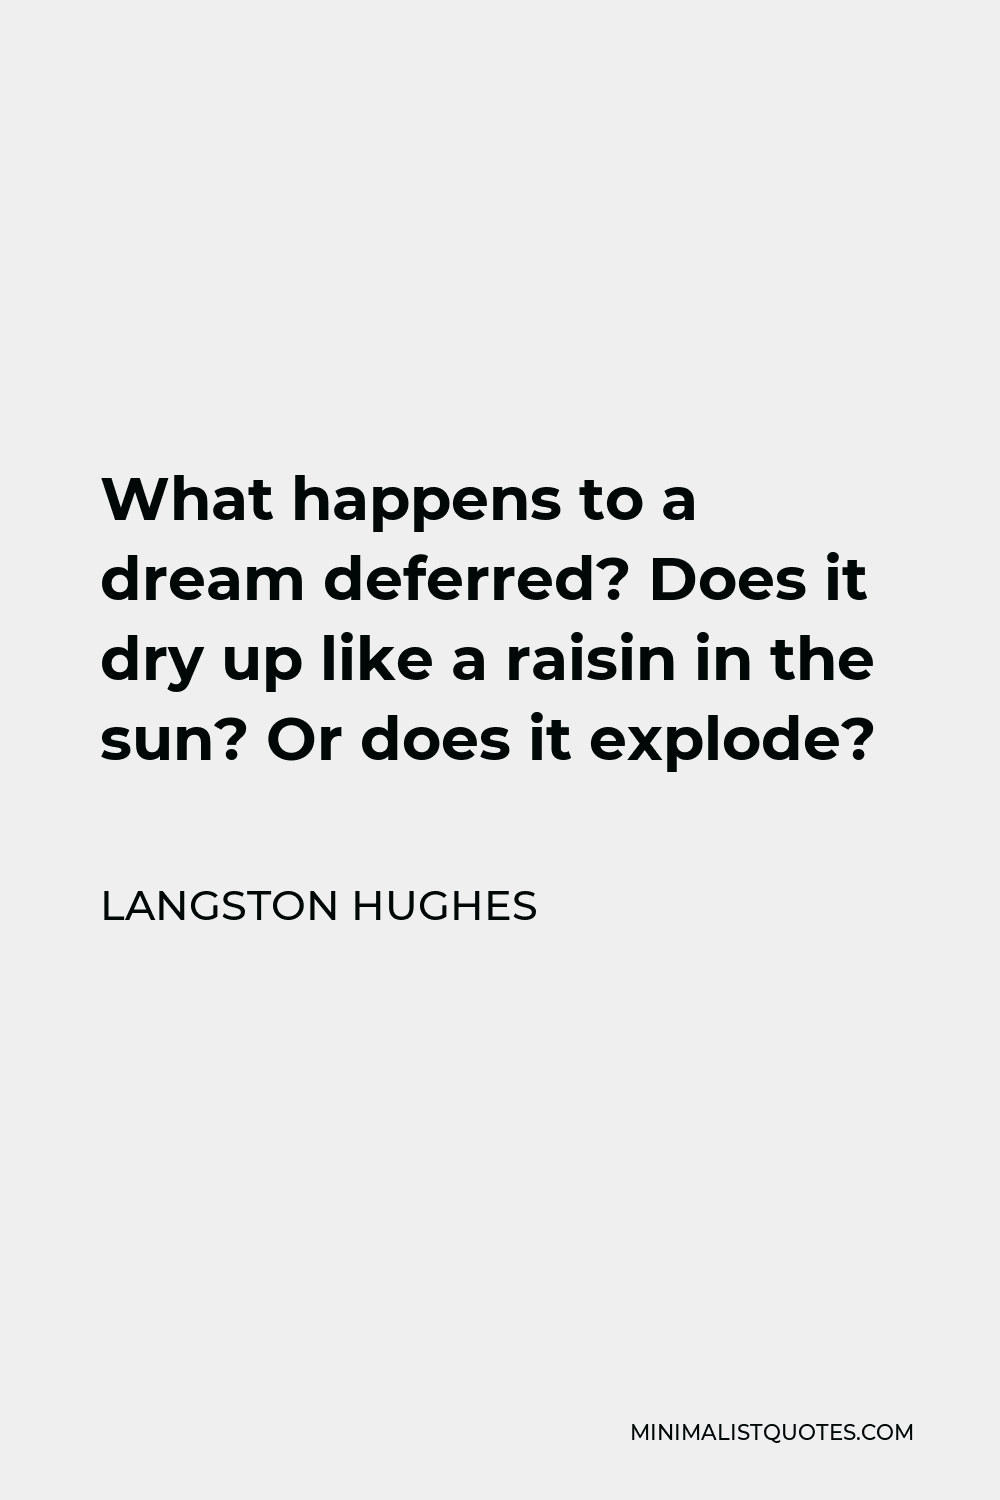 Langston Hughes Quote - What happens to a dream deferred? Does it dry up like a raisin in the sun? Or does it explode?